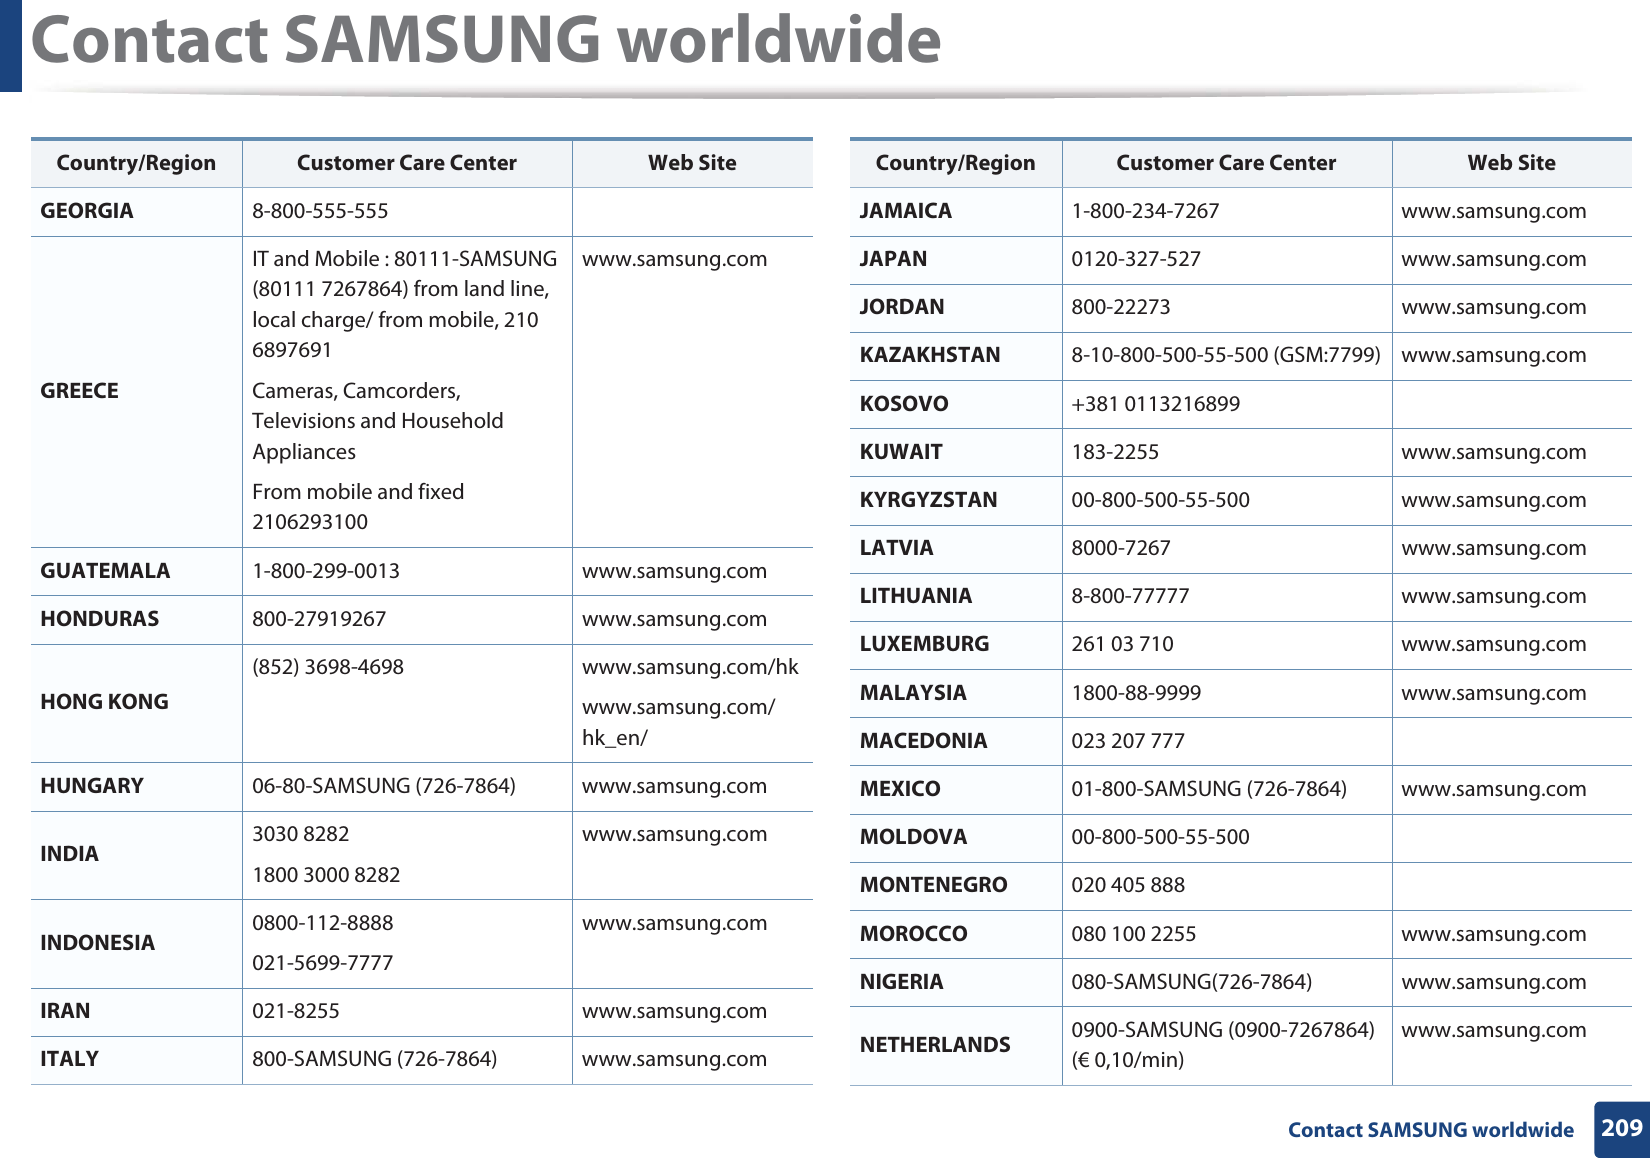 Contact SAMSUNG worldwide209 Contact SAMSUNG worldwideGEORGIA 8-800-555-555GREECEIT and Mobile : 80111-SAMSUNG (80111 7267864) from land line, local charge/ from mobile, 210 6897691 Cameras, Camcorders, Televisions and Household AppliancesFrom mobile and fixed 2106293100www.samsung.comGUATEMALA 1-800-299-0013 www.samsung.comHONDURAS 800-27919267 www.samsung.comHONG KONG(852) 3698-4698 www.samsung.com/hkwww.samsung.com/hk_en/HUNGARY 06-80-SAMSUNG (726-7864) www.samsung.comINDIA 3030 82821800 3000 8282 www.samsung.comINDONESIA 0800-112-8888021-5699-7777www.samsung.comIRAN 021-8255 www.samsung.comITALY 800-SAMSUNG (726-7864) www.samsung.comCountry/Region Customer Care Center  Web SiteJAMAICA 1-800-234-7267 www.samsung.comJAPAN 0120-327-527 www.samsung.comJORDAN 800-22273 www.samsung.comKAZAKHSTAN 8-10-800-500-55-500 (GSM:7799) www.samsung.comKOSOVO +381 0113216899KUWAIT 183-2255 www.samsung.comKYRGYZSTAN 00-800-500-55-500 www.samsung.comLATVIA 8000-7267 www.samsung.comLITHUANIA 8-800-77777 www.samsung.comLUXEMBURG 261 03 710 www.samsung.comMALAYSIA 1800-88-9999 www.samsung.comMACEDONIA 023 207 777MEXICO 01-800-SAMSUNG (726-7864) www.samsung.comMOLDOVA 00-800-500-55-500MONTENEGRO 020 405 888MOROCCO 080 100 2255 www.samsung.comNIGERIA 080-SAMSUNG(726-7864) www.samsung.comNETHERLANDS 0900-SAMSUNG (0900-7267864) (€ 0,10/min)www.samsung.comCountry/Region Customer Care Center  Web Site